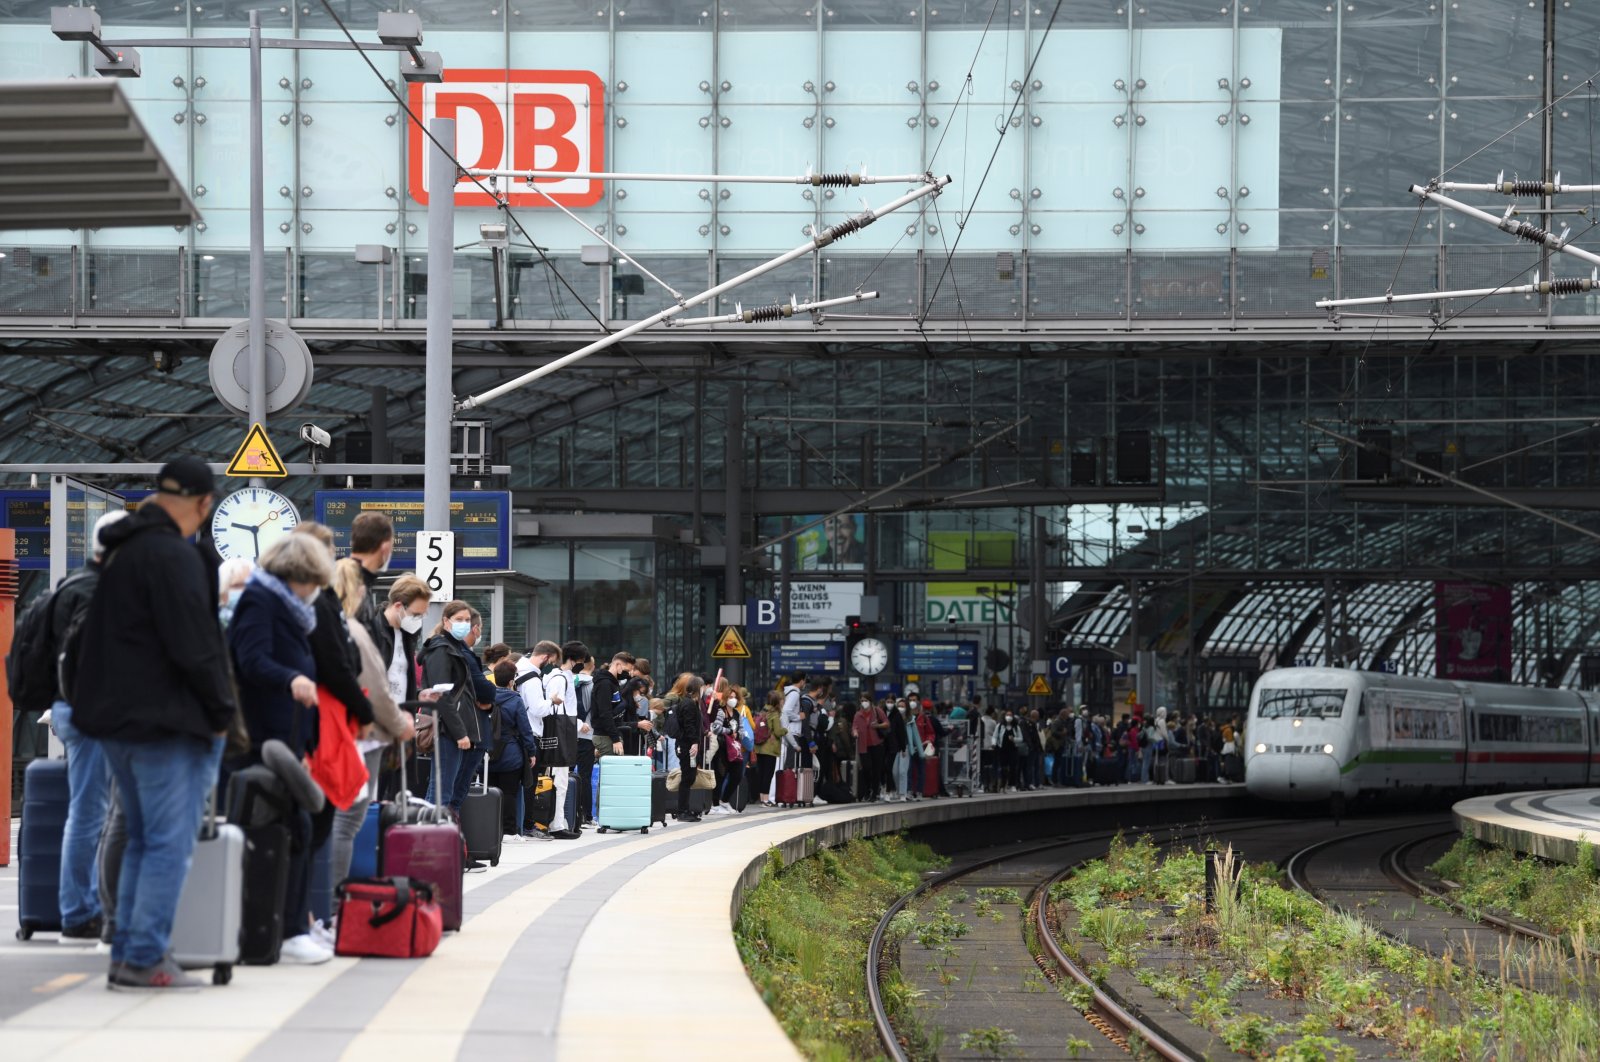 People wait for an arriving train on a platform at Berlin's main railway station during a nationwide rail workers' strike, in Berlin, Germany, Aug. 23, 2021. (Reuters Photo)